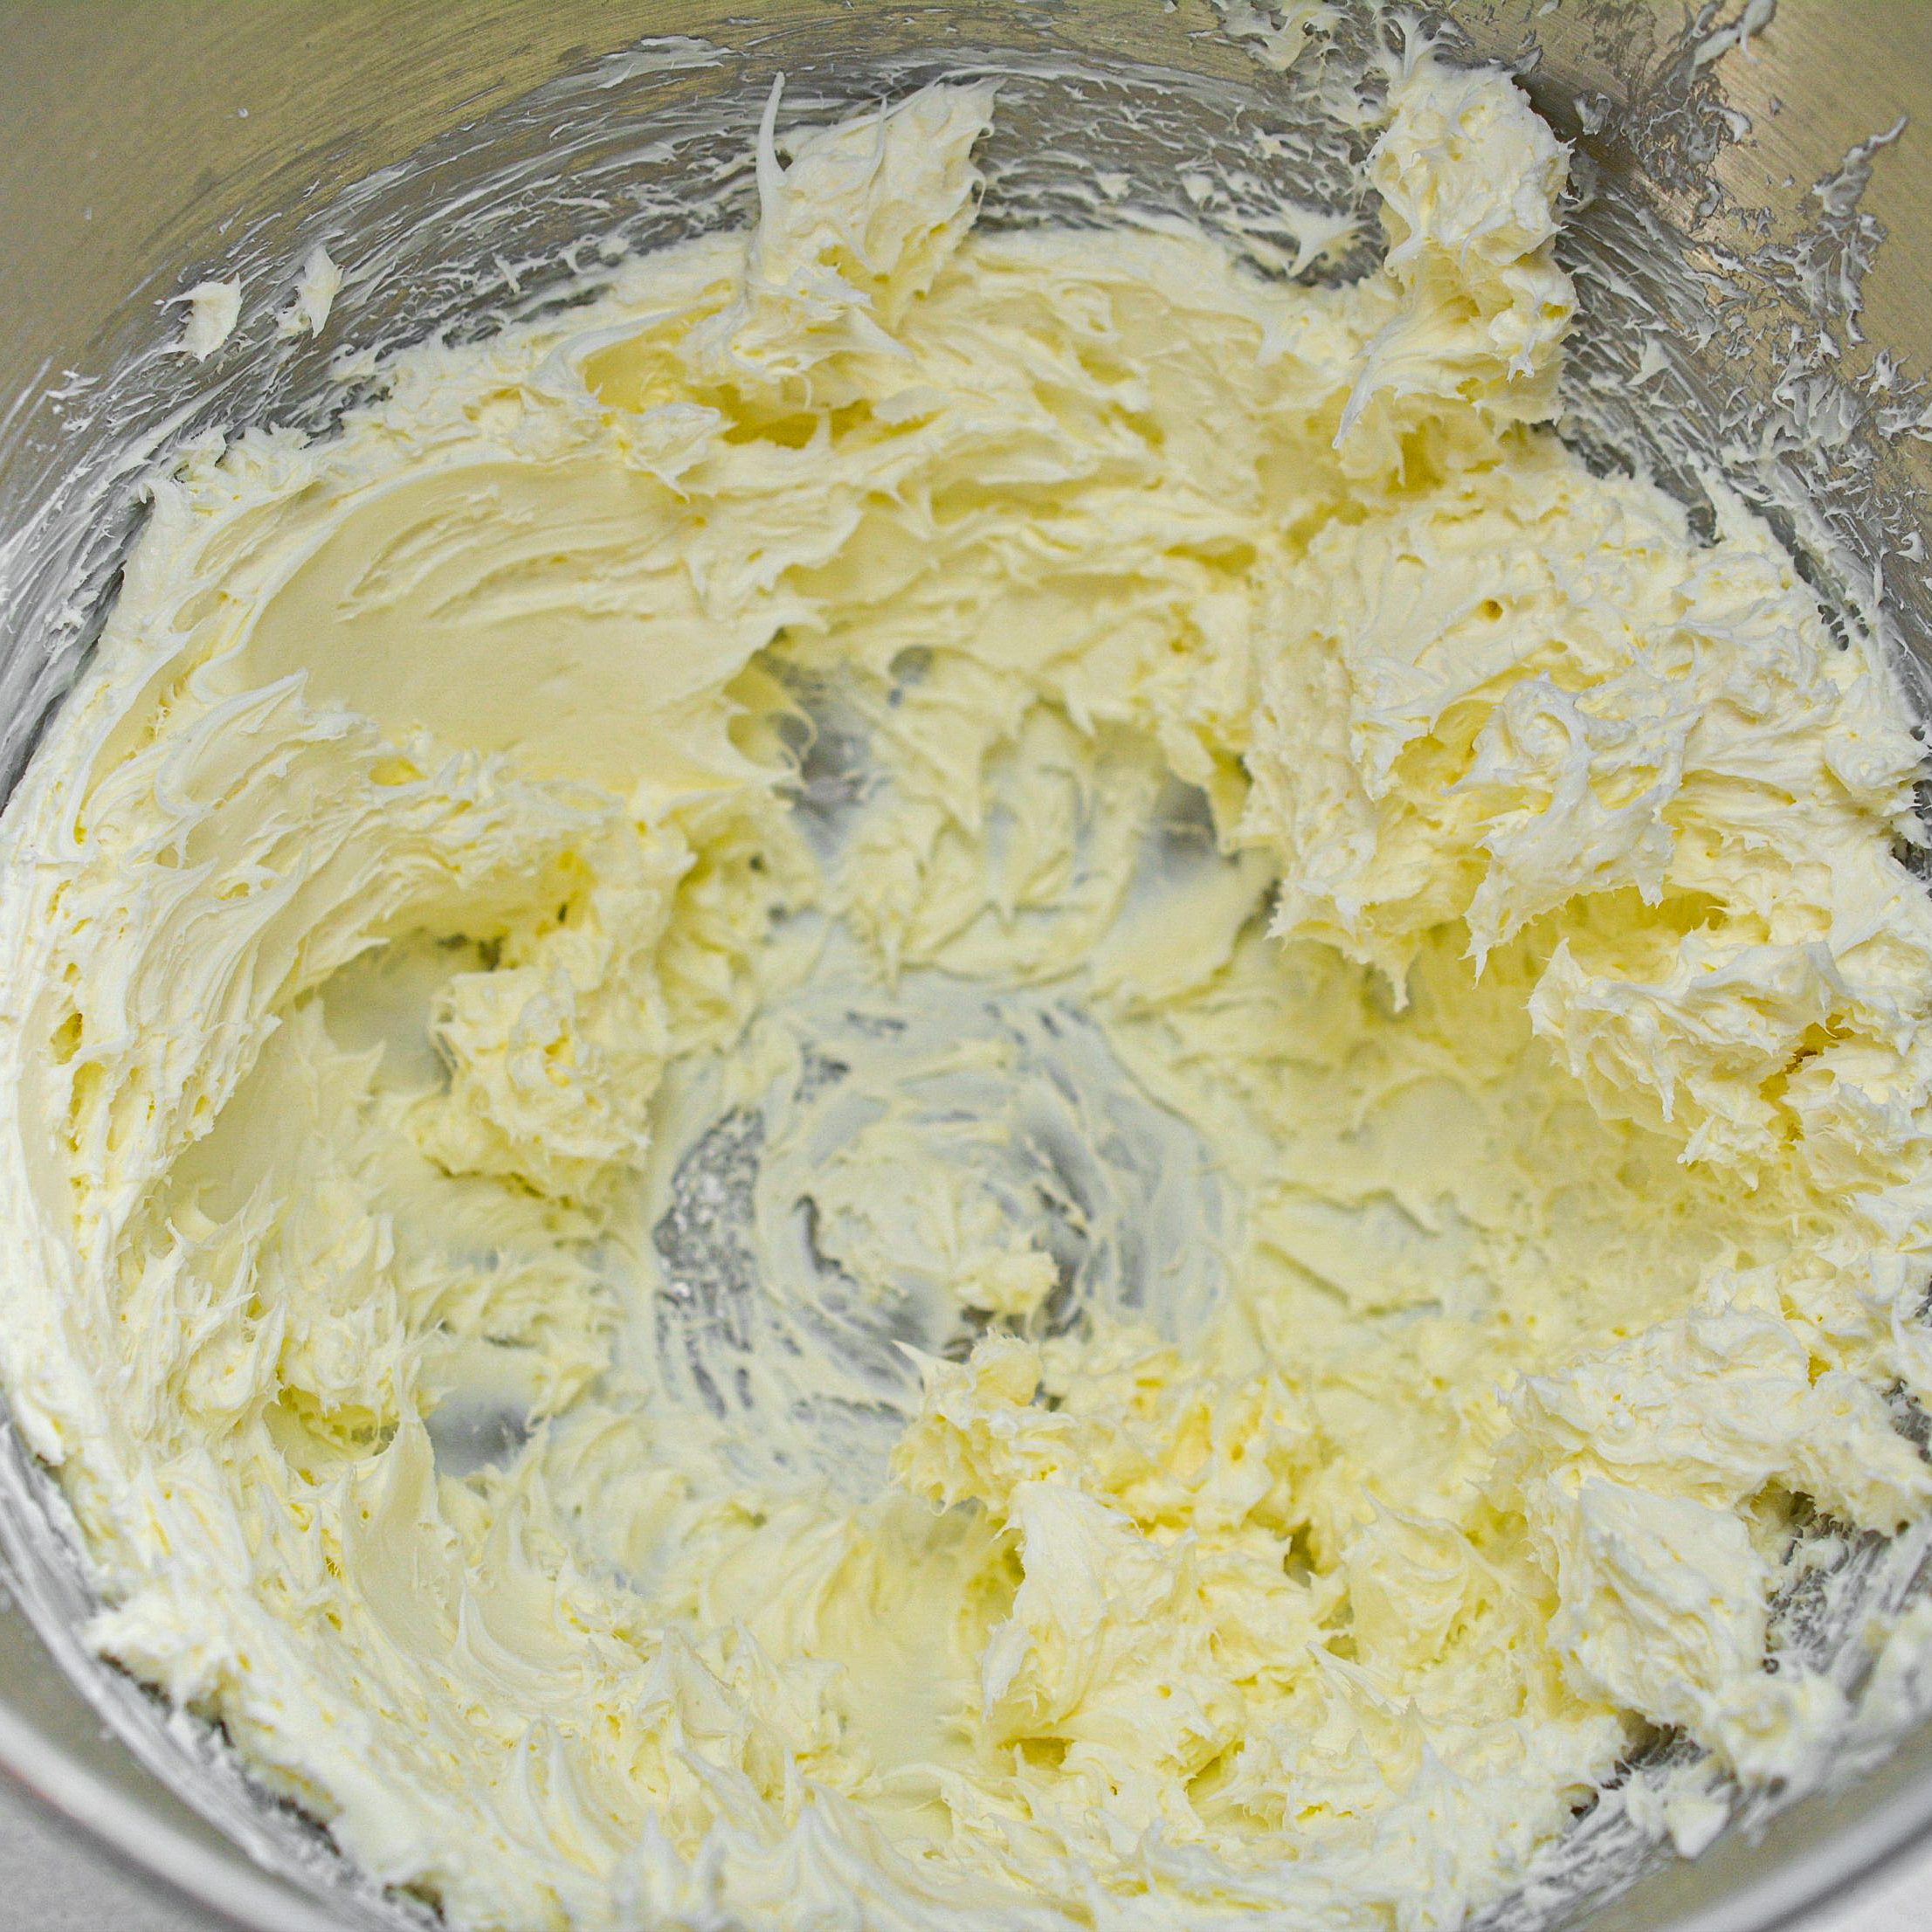 Cream cheese in a mixing bowl until smooth.